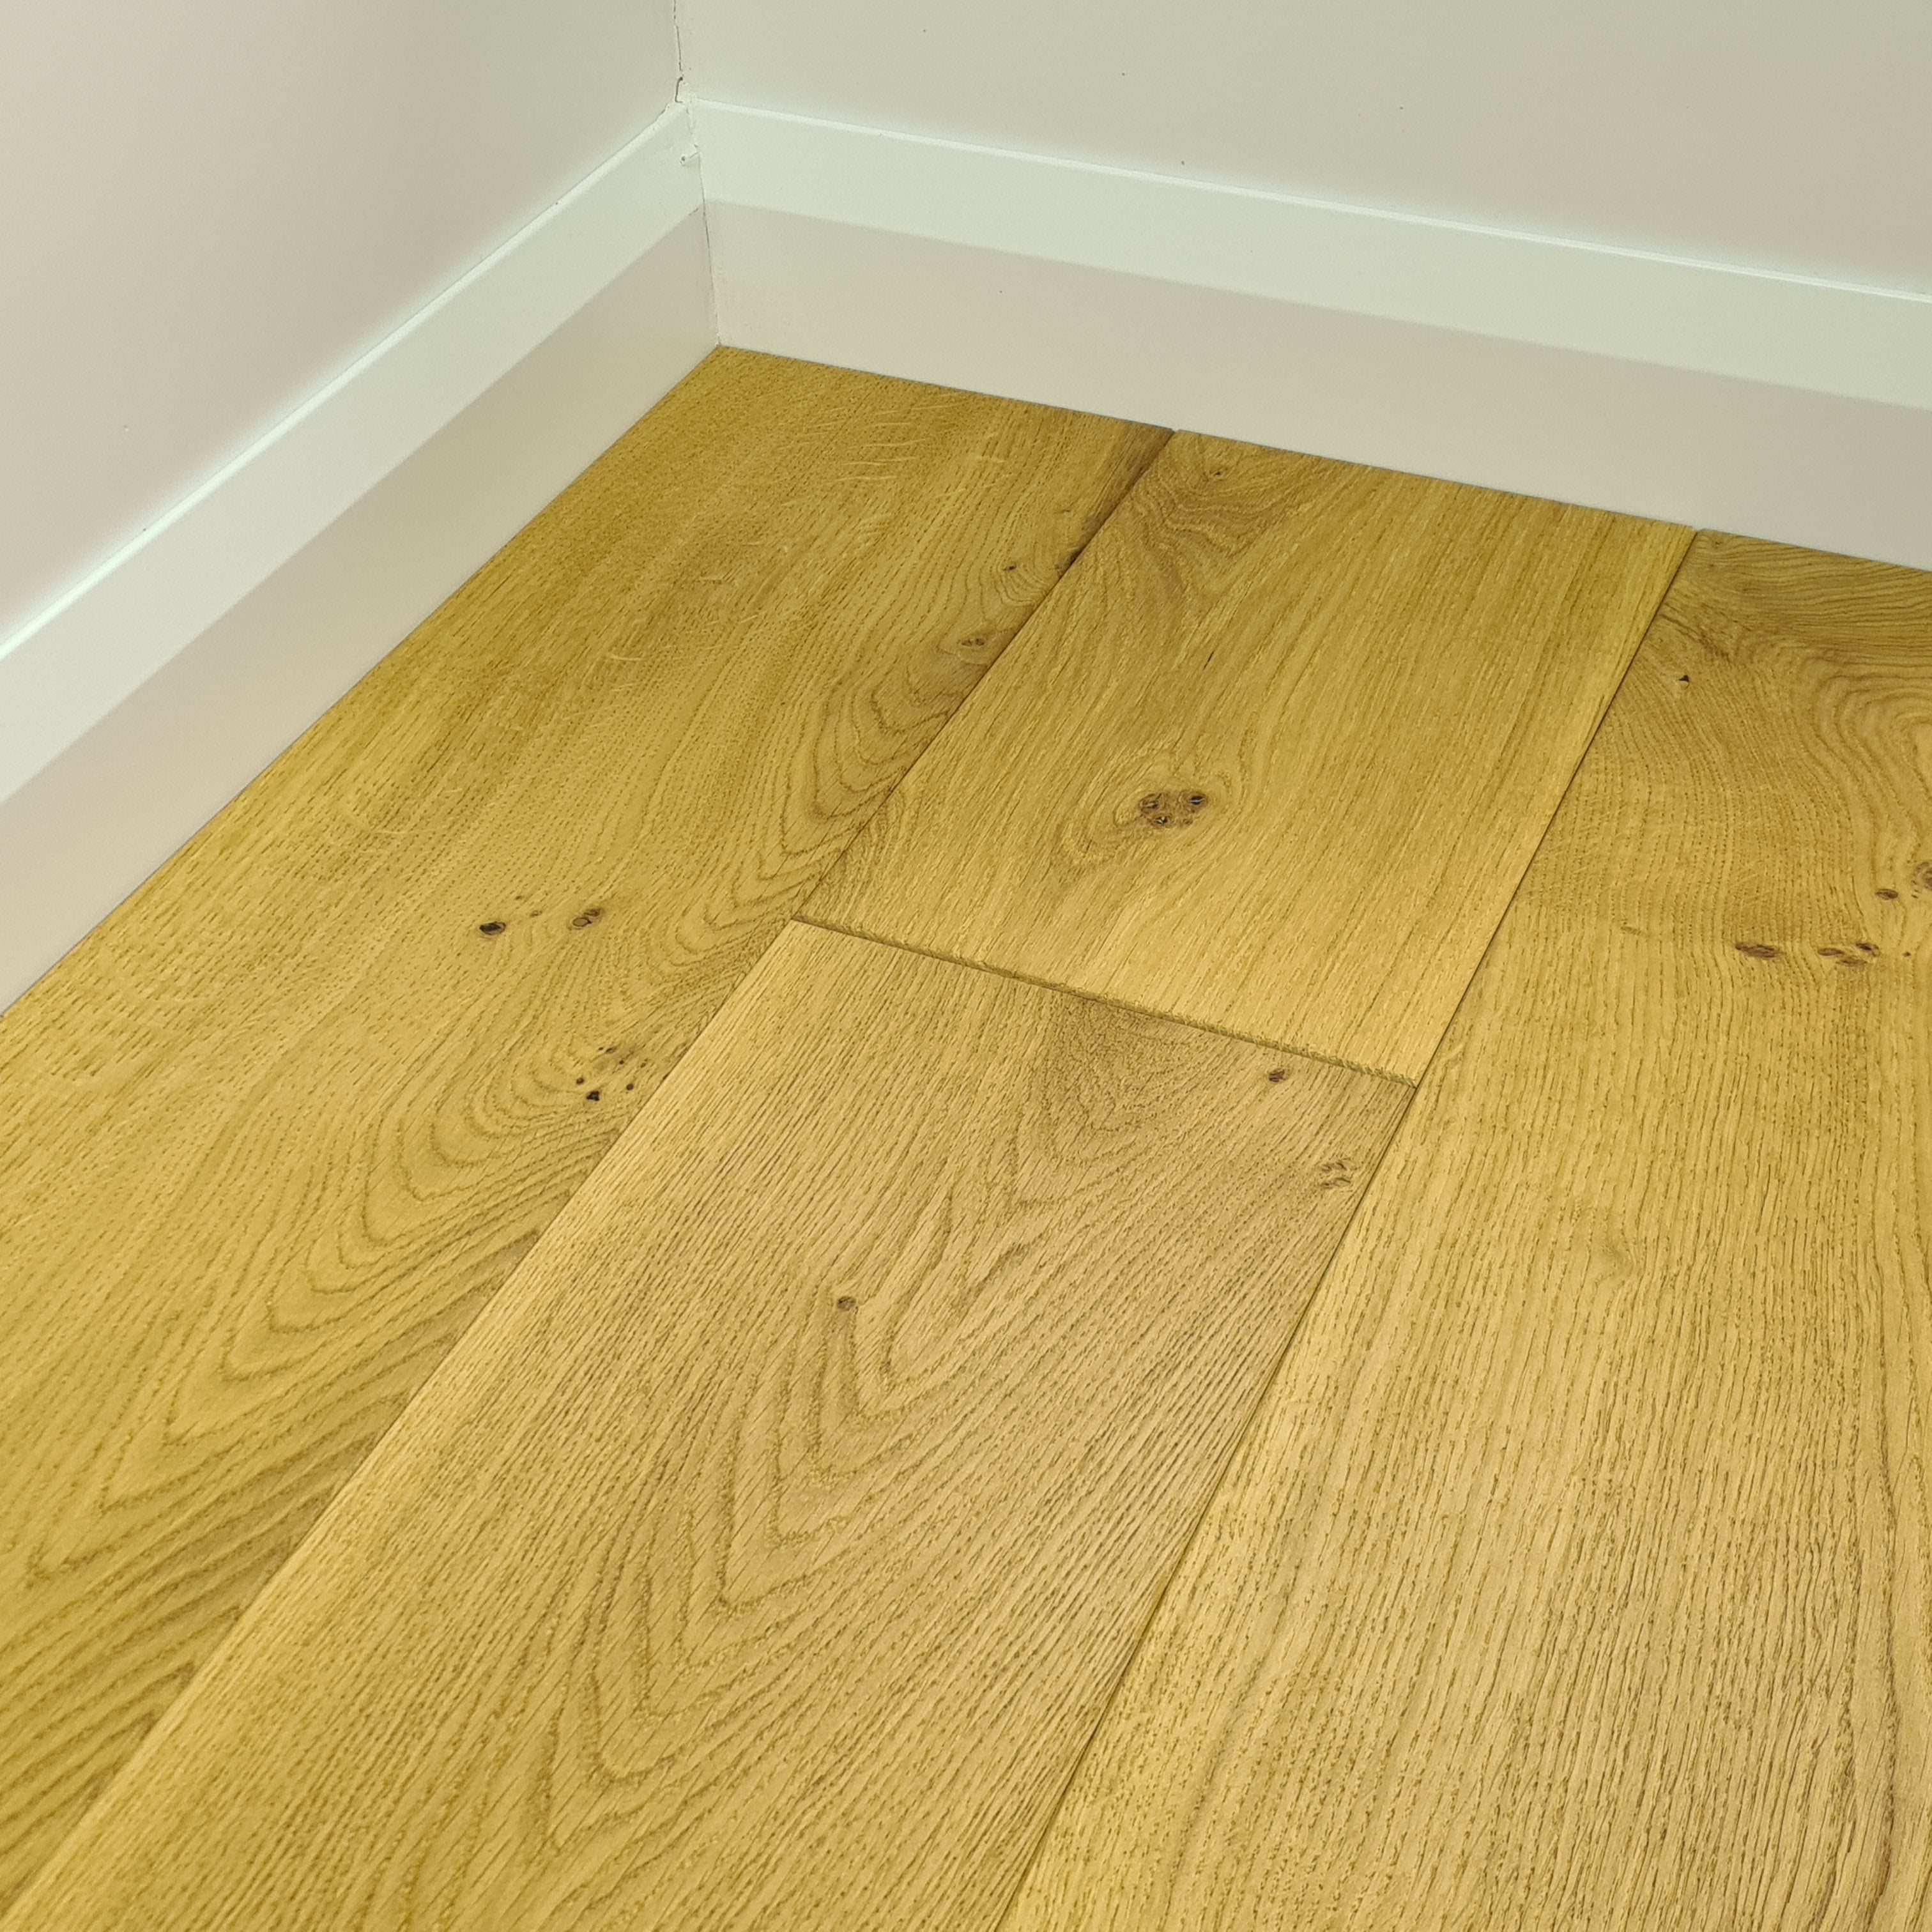 Chene 20/6x150mm Rustic Brushed and Lacquered Oak Engineered Flooring  £56.95m2